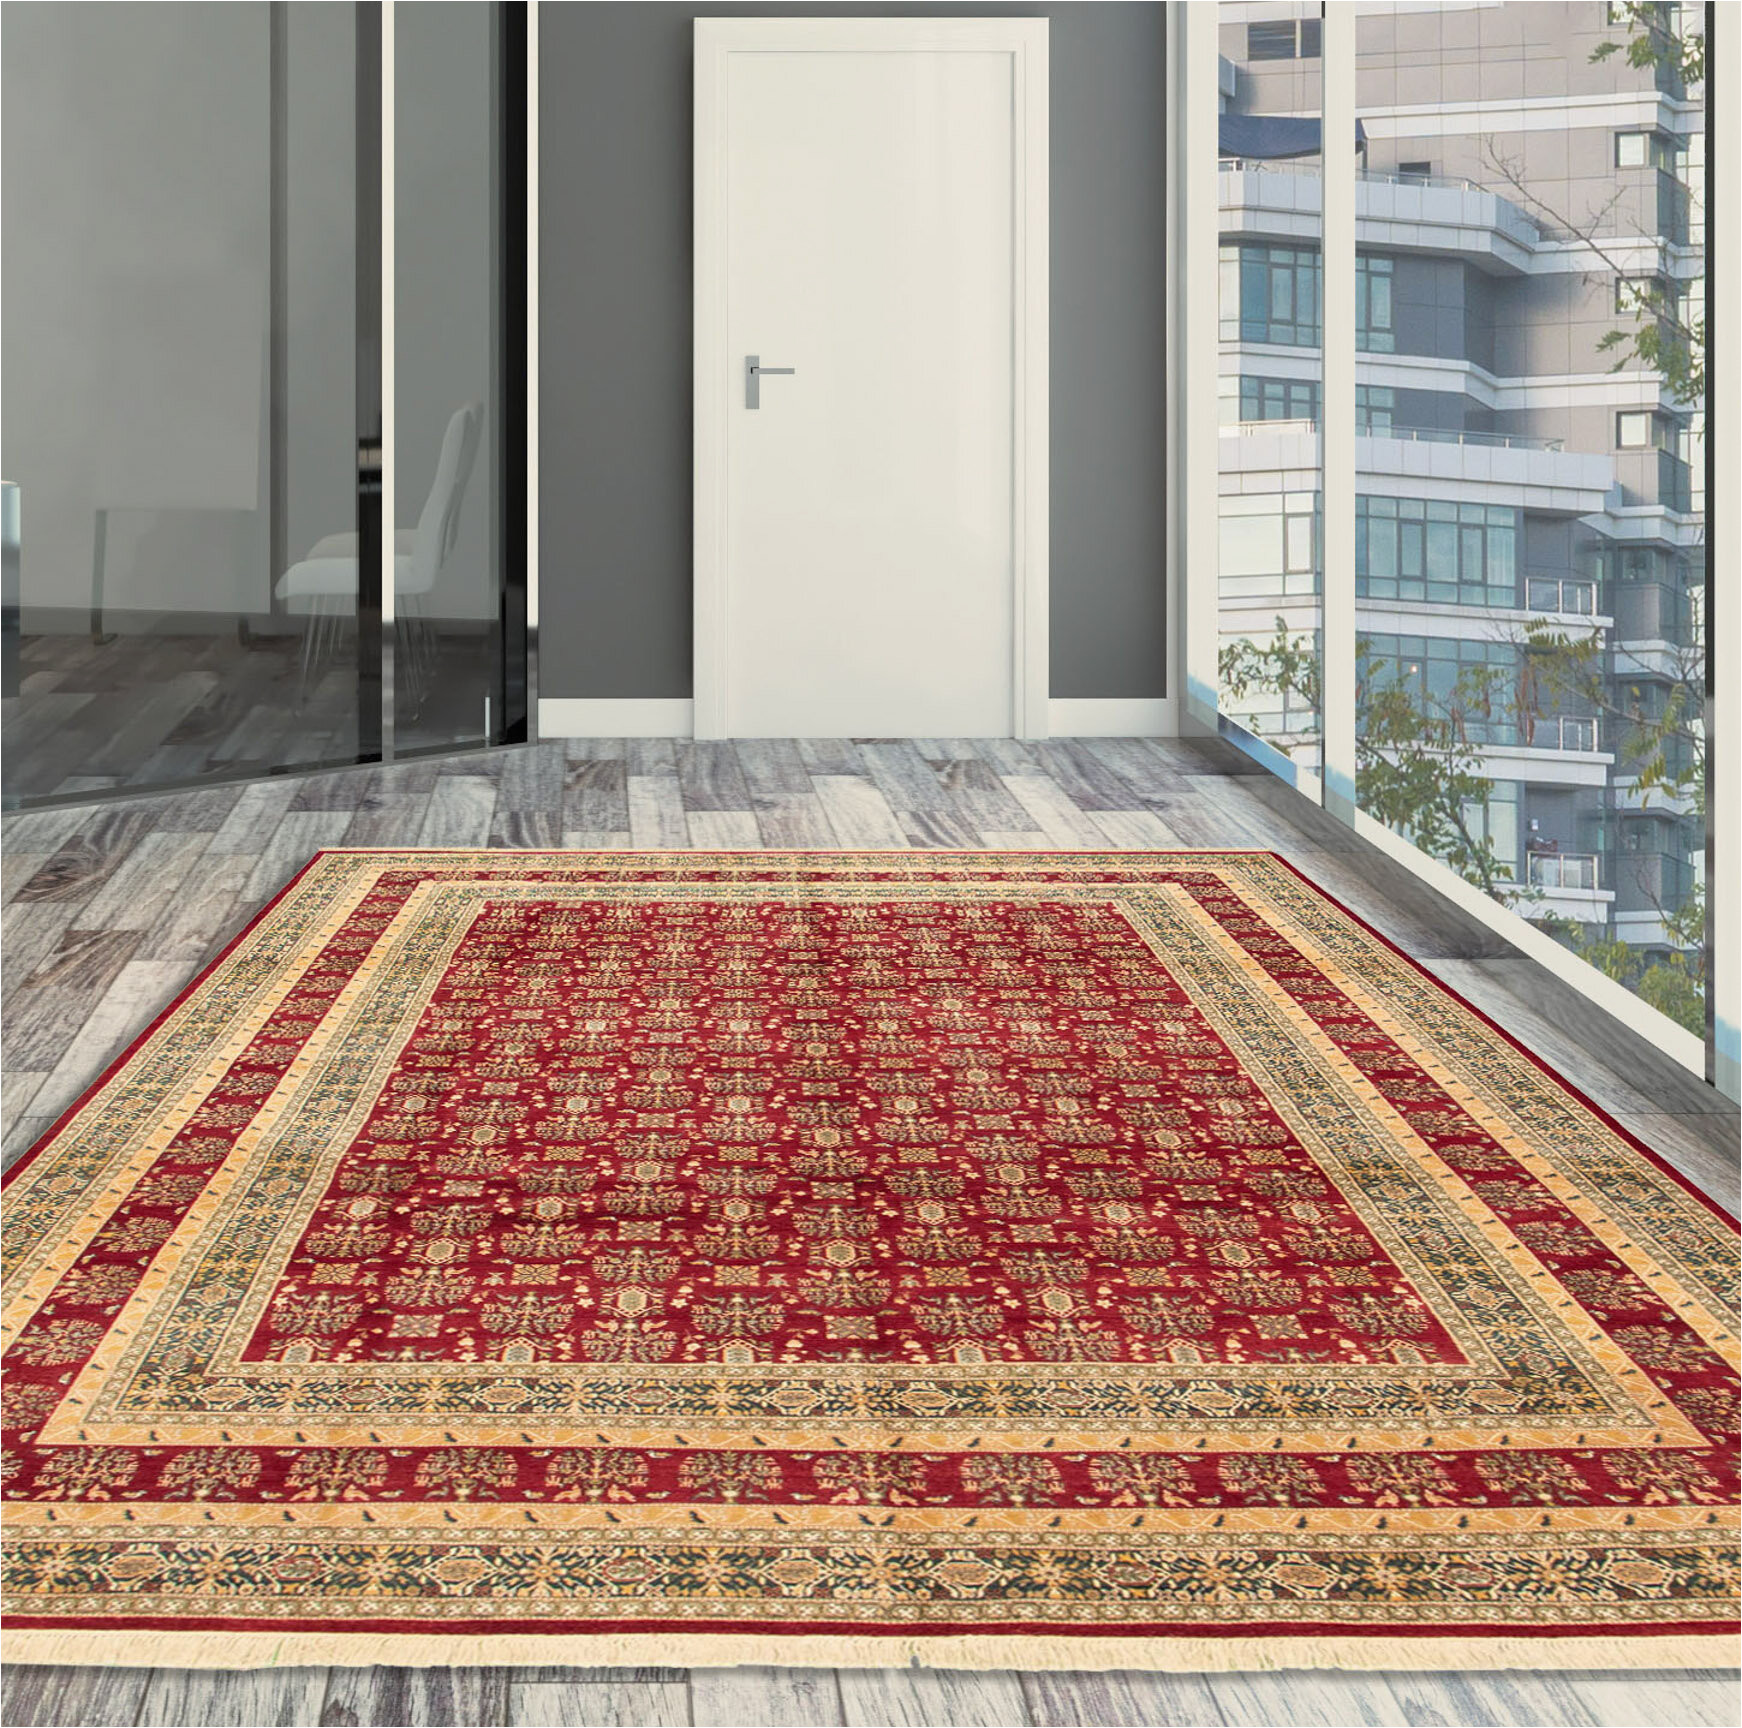 9 X 11 Wool area Rugs One-of-a-kind Hand-knotted New Age 9′ X 11’8″ Wool area Rug In Burgundy/beige